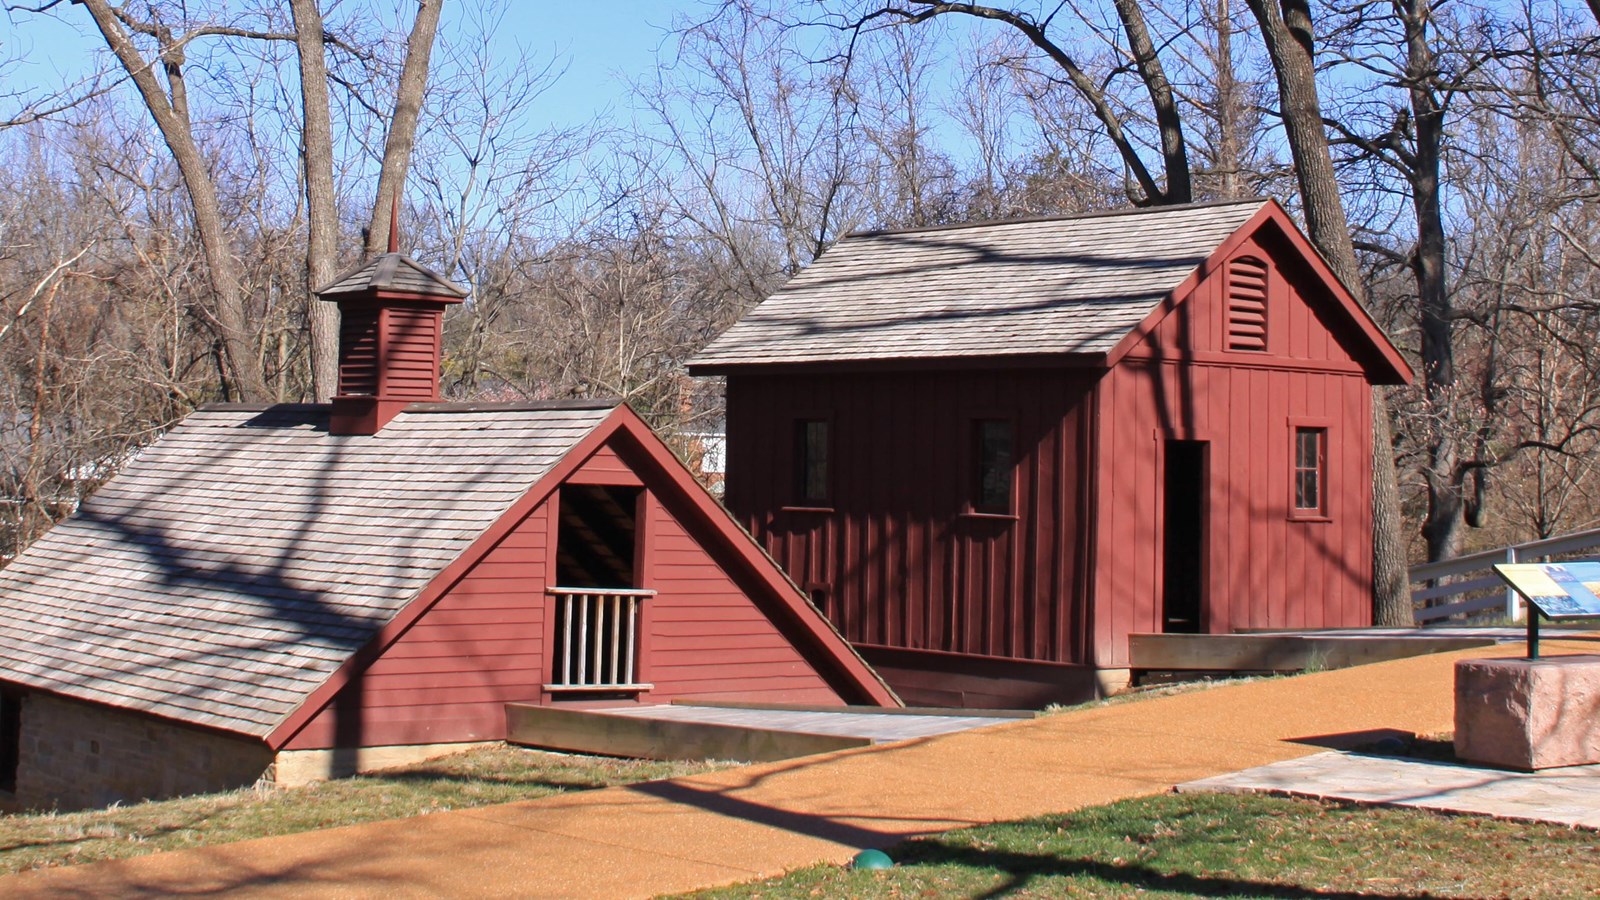 two wooden structures, painted red. Ice house is on the left and chicken house is on the right